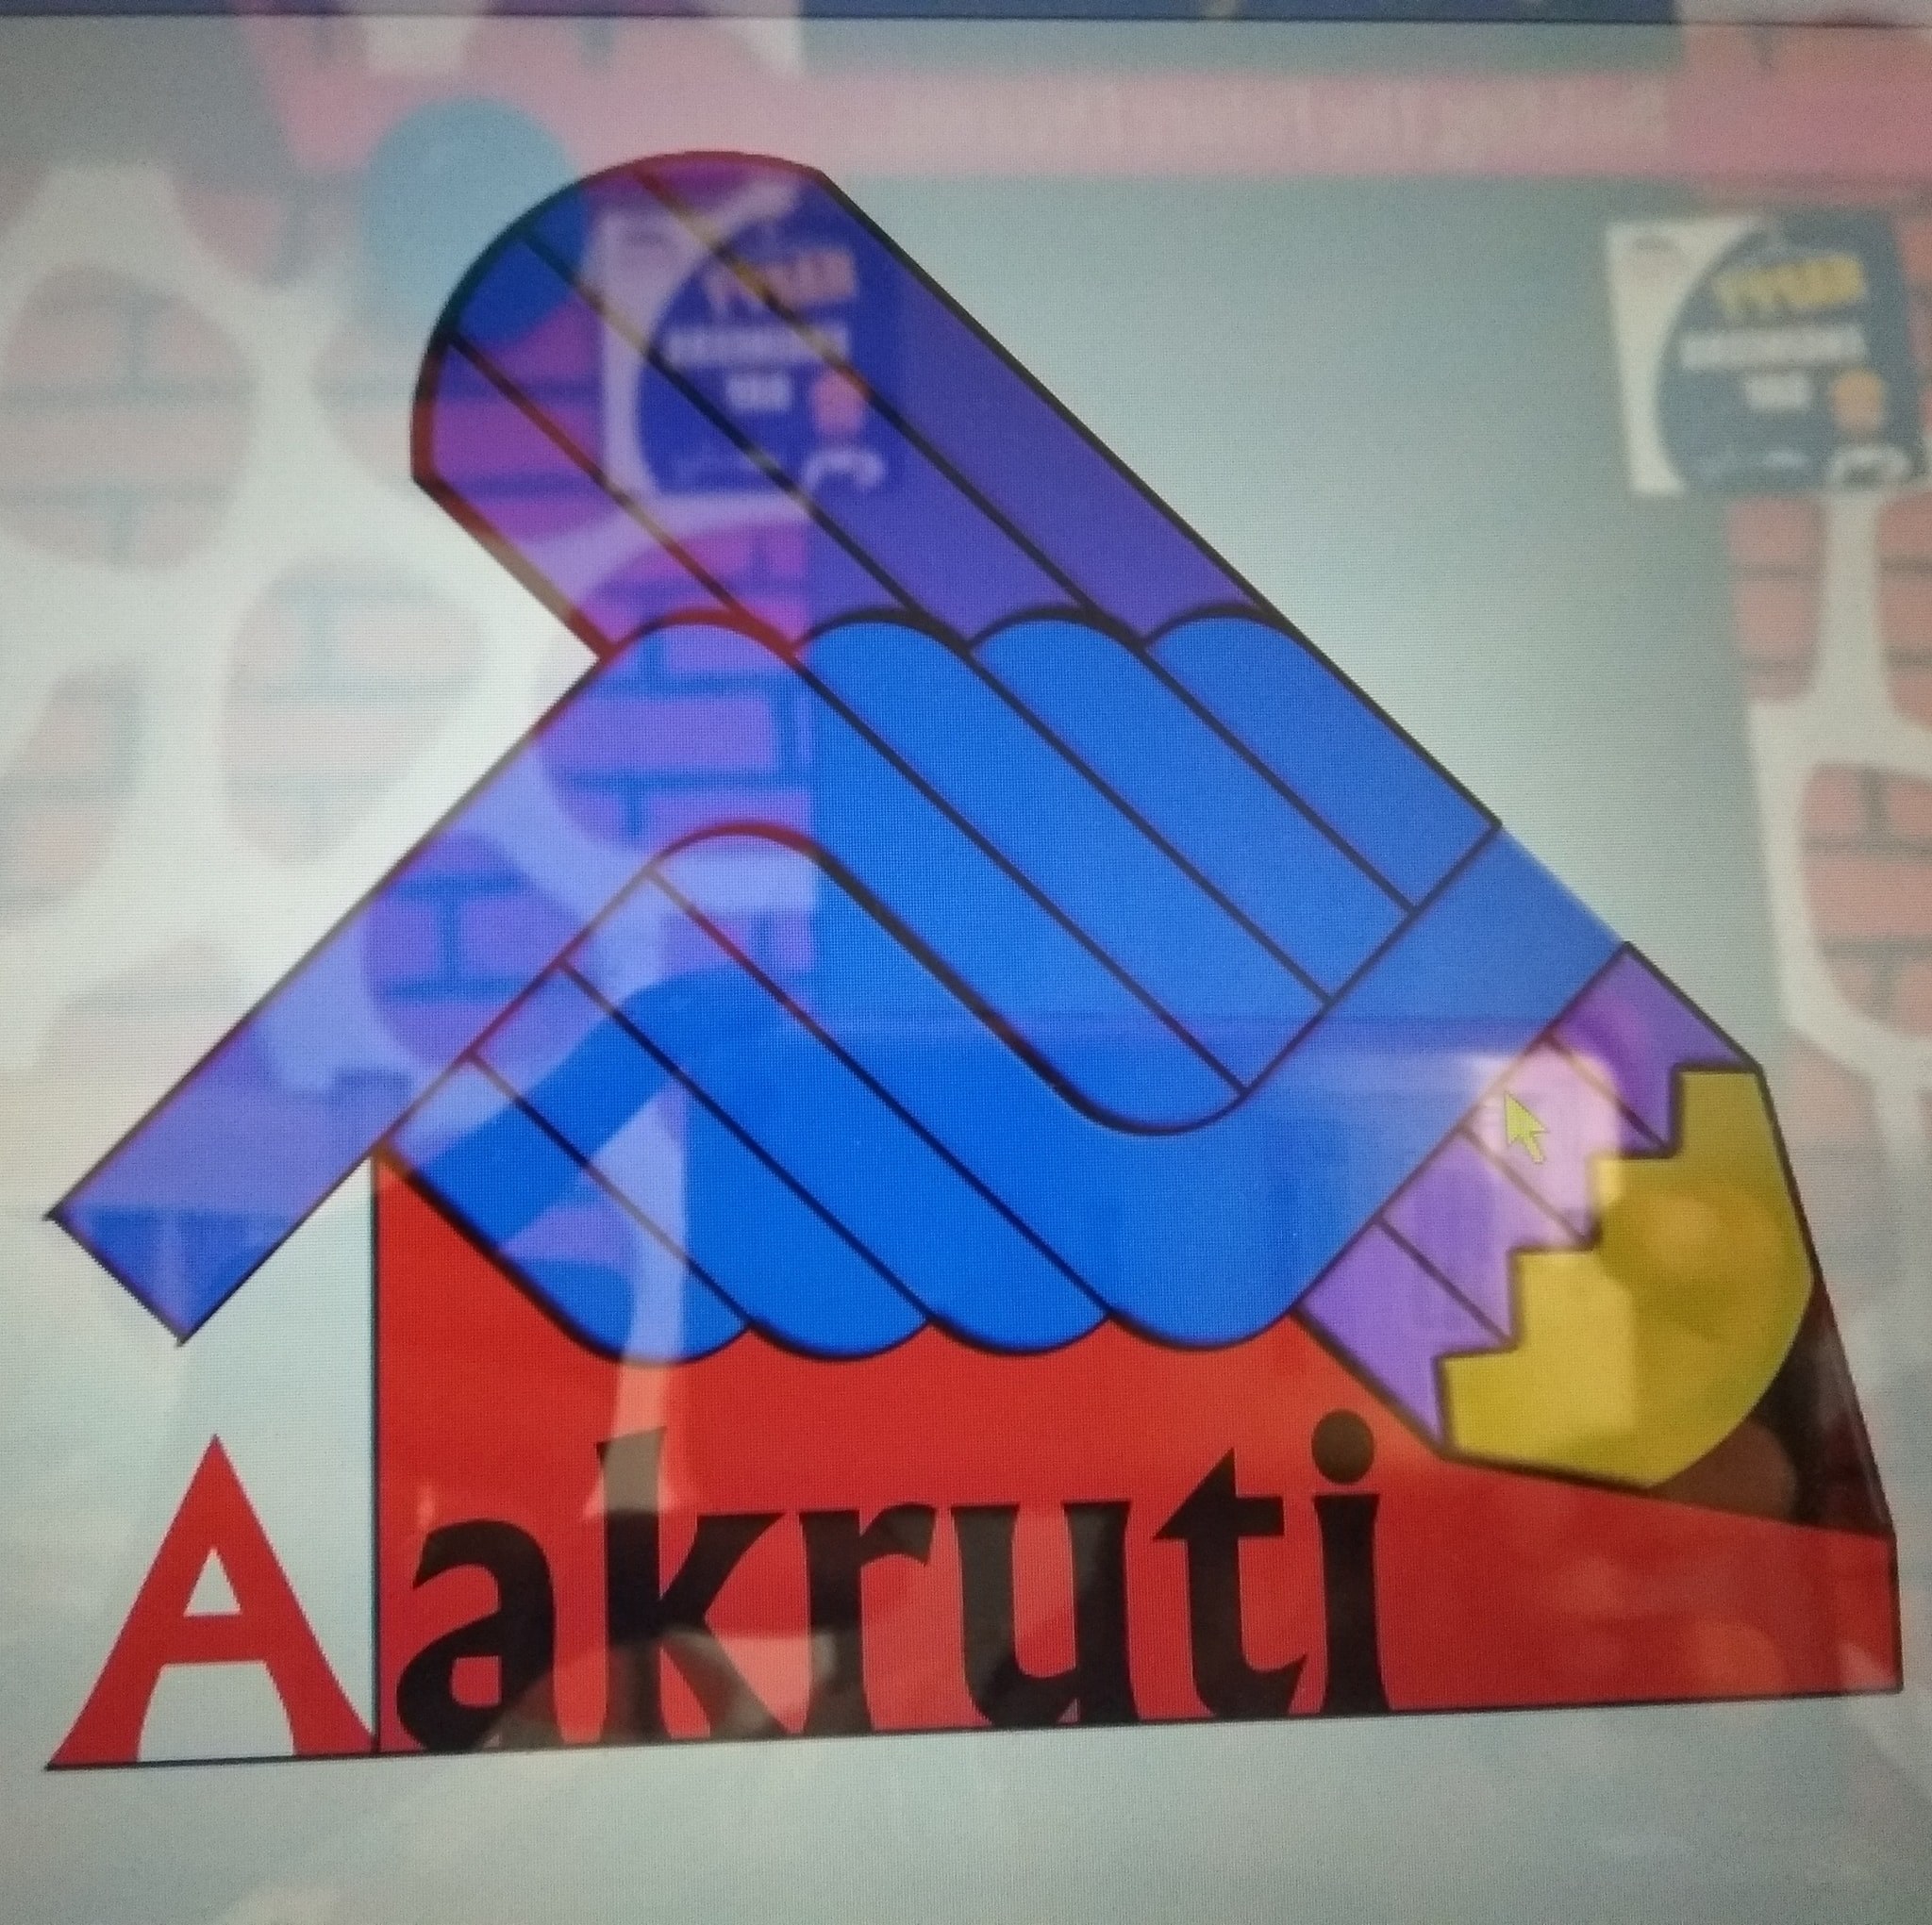 AAKRUTI building The Future Dreams|Legal Services|Professional Services